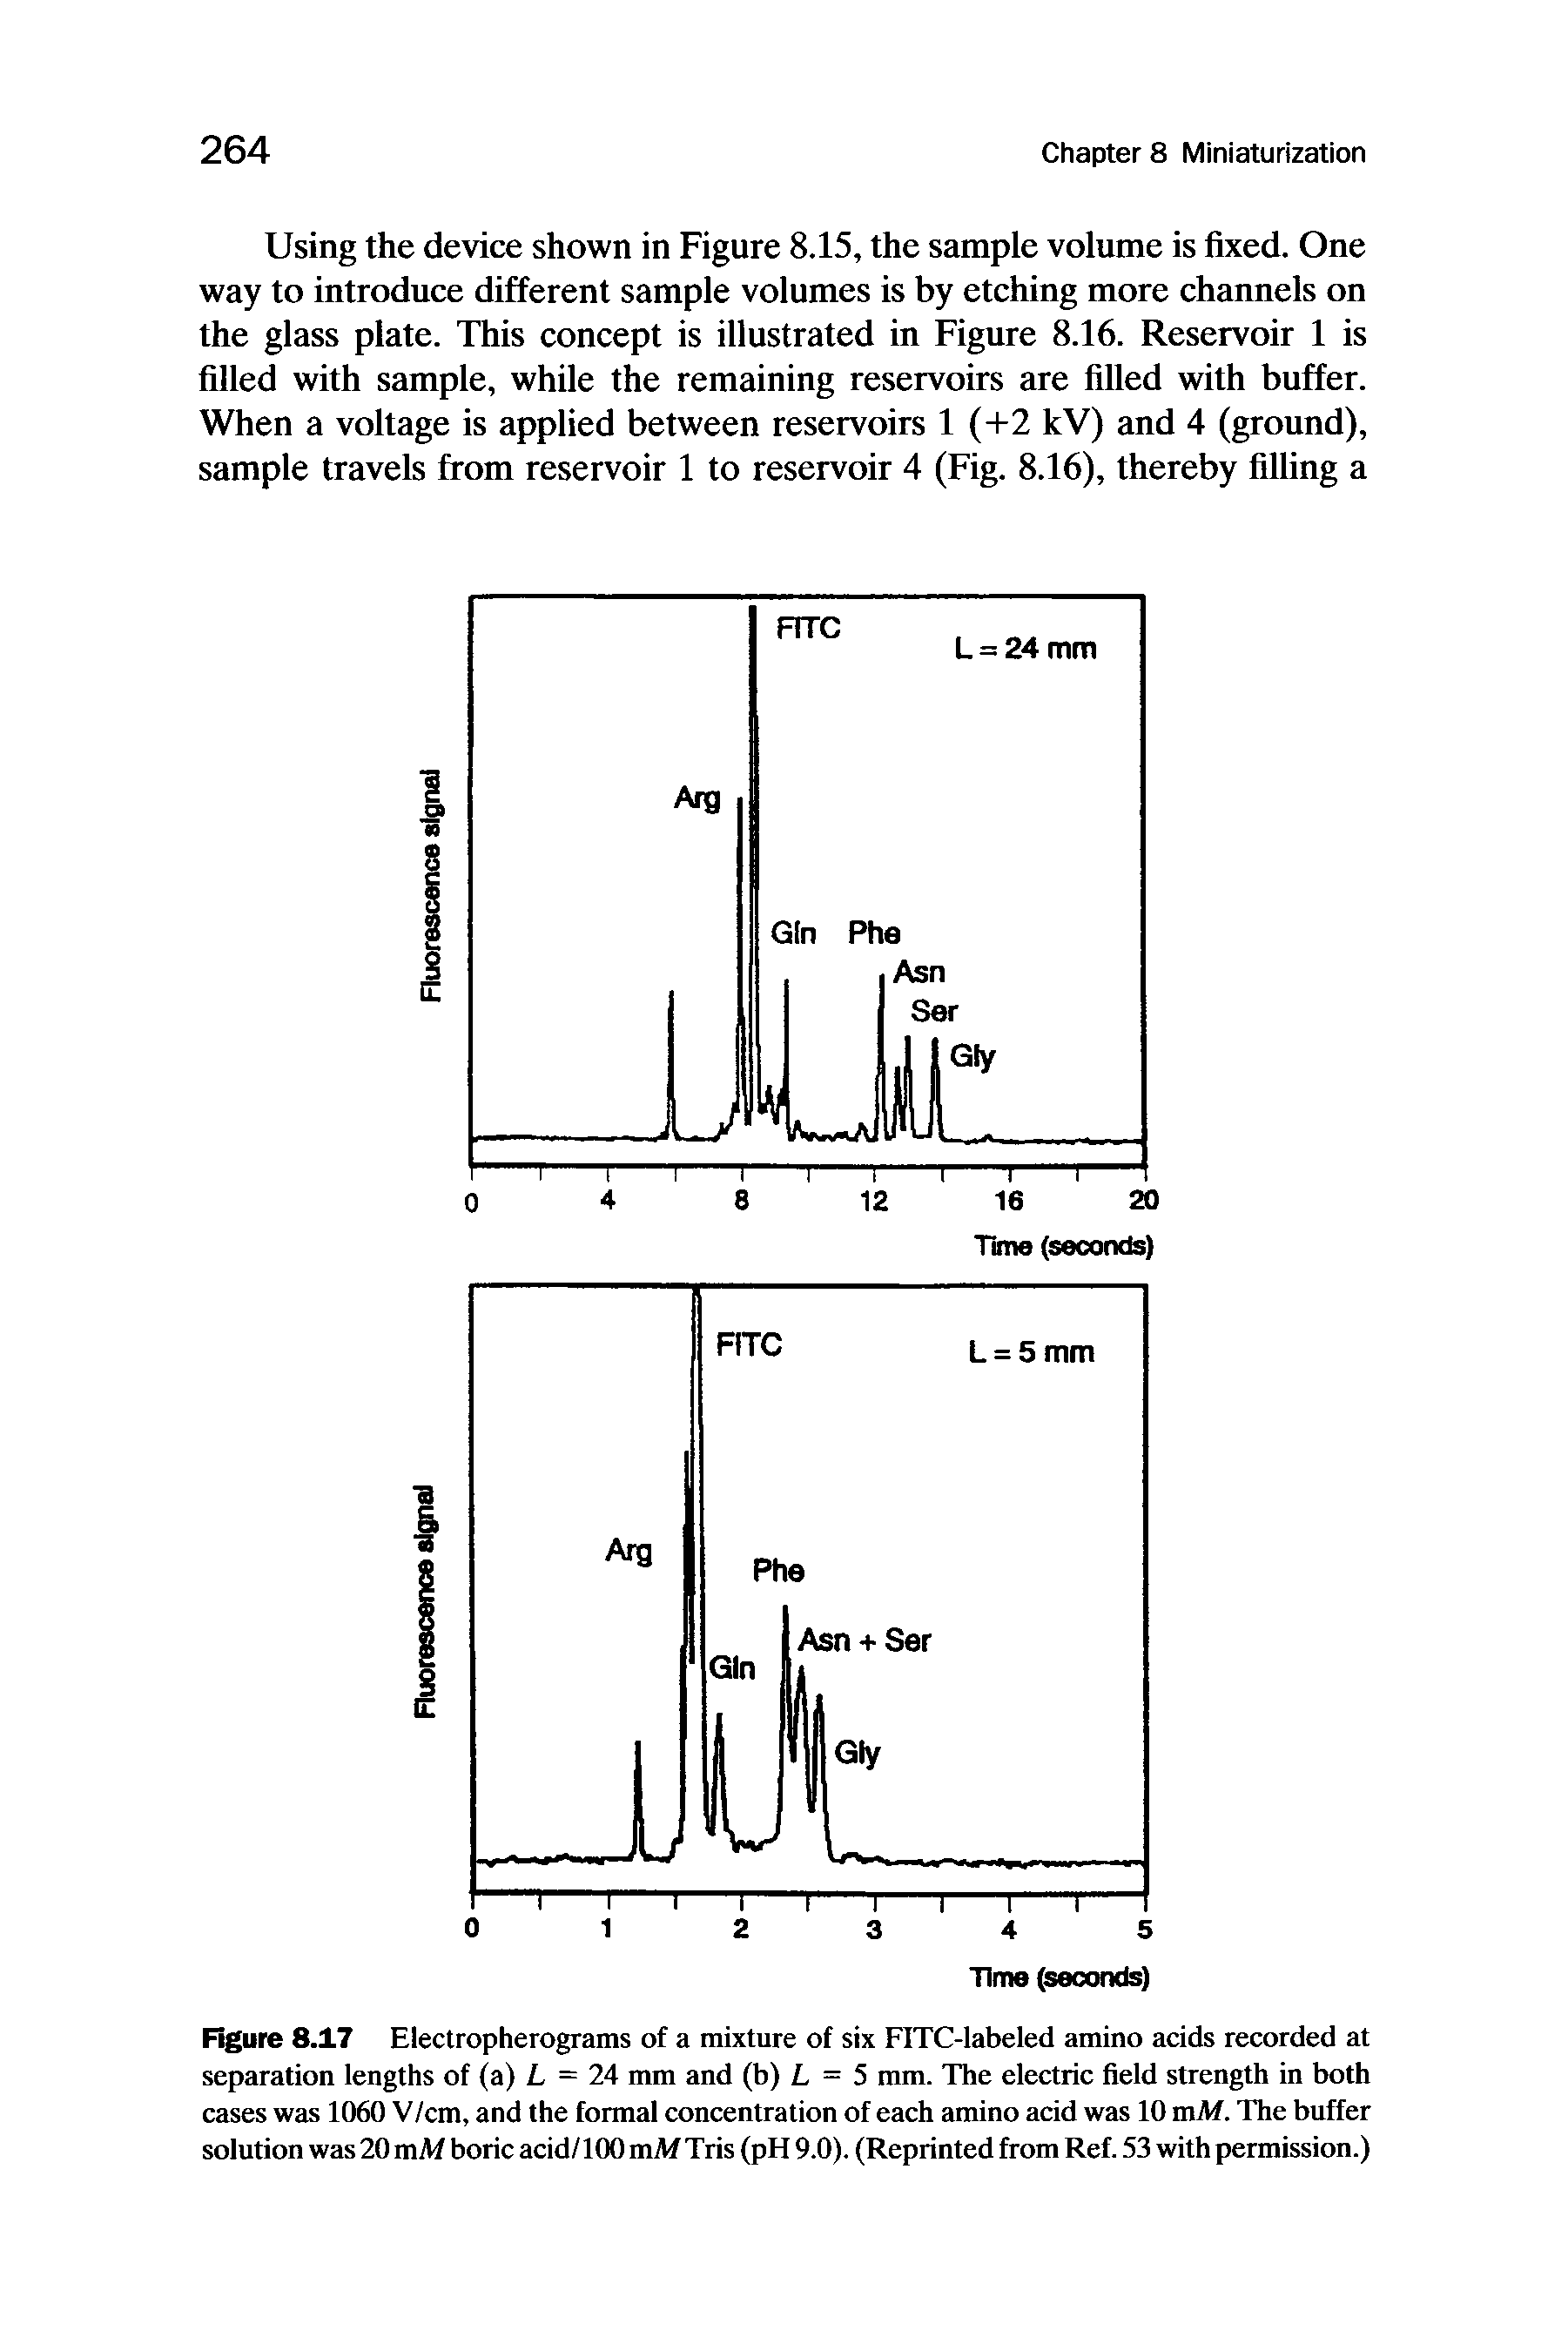 Figure 8.17 Electropherograms of a mixture of six FITC-labeled amino acids recorded at separation lengths of (a) L = 24 mm and (b) L = 5 mm. The electric field strength in both cases was 1060 V/cm, and the formal concentration of each amino acid was 10 mM. The buffer solution was 20 mAf boric acid/100 mAf Tris (pH 9.0). (Reprinted from Ref. 53 with permission.)...